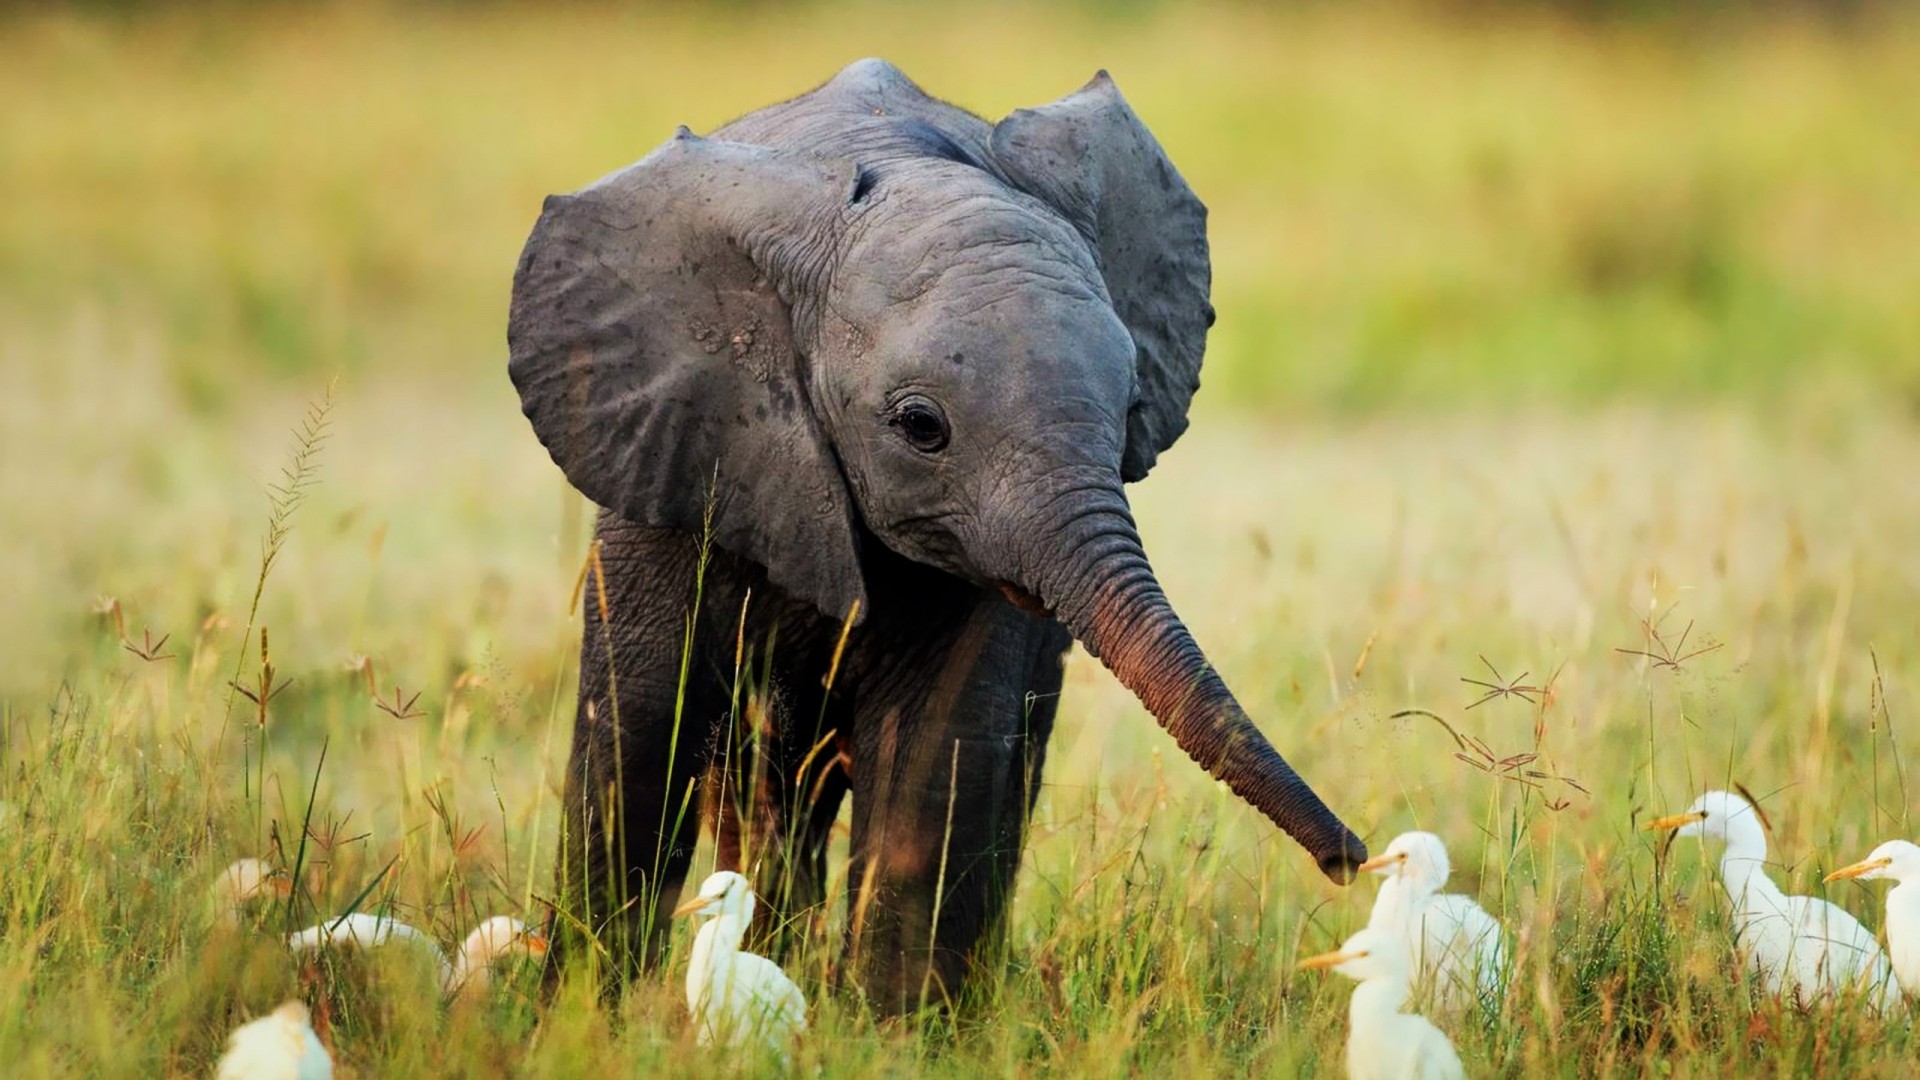 Baby Elephant HD Wallpaper, Background Images